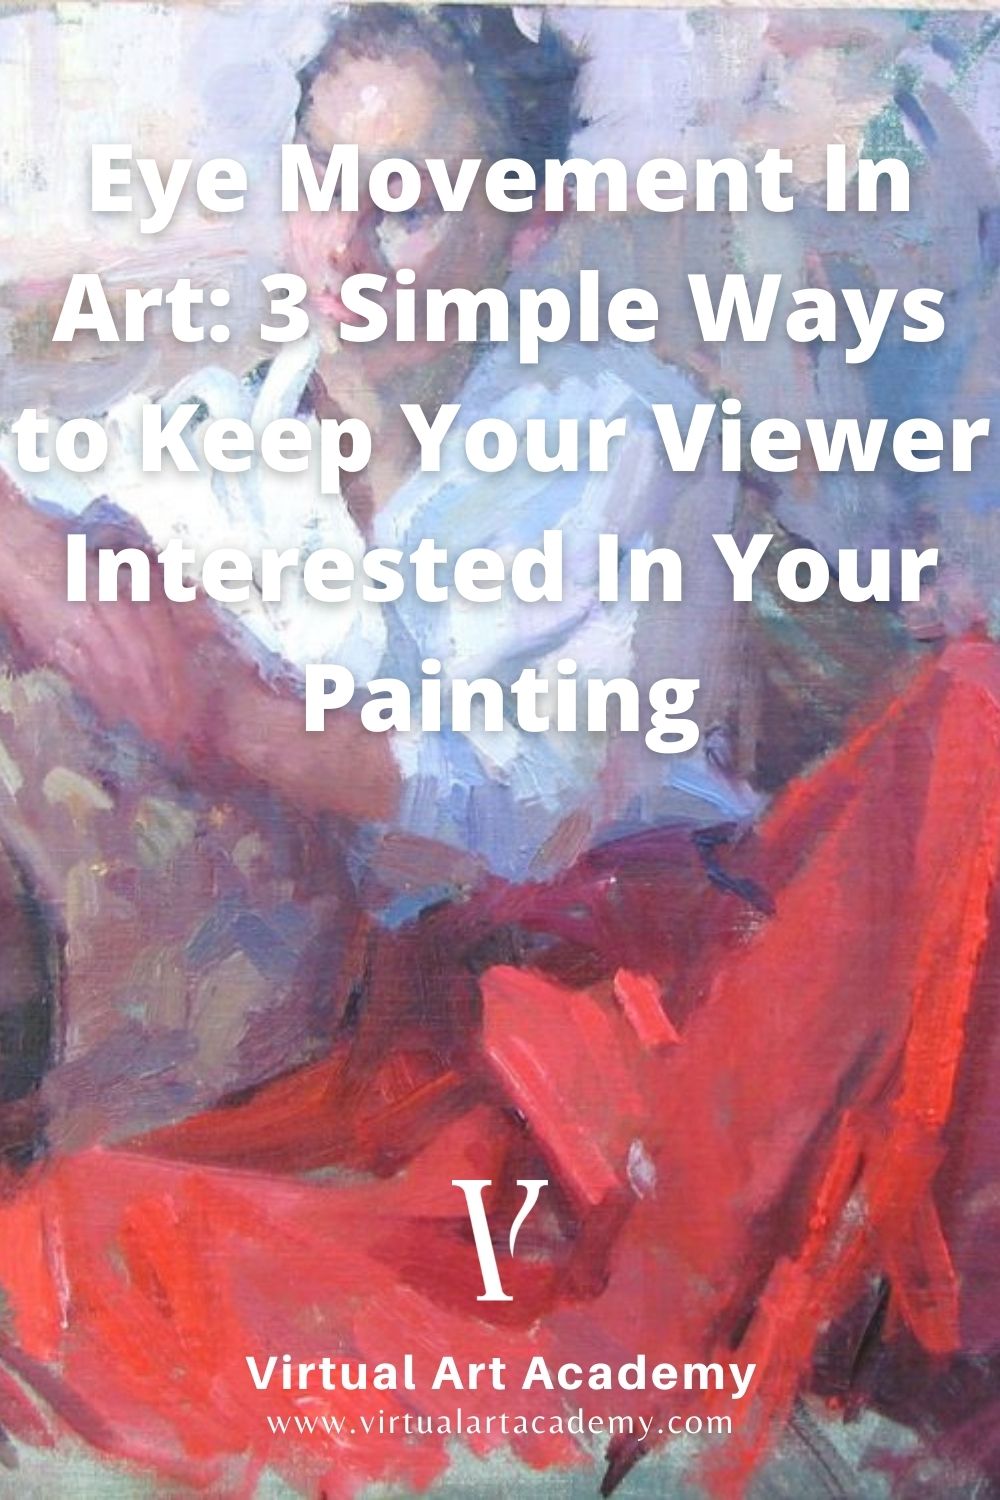 Eye Movement In Art: 3 Simple Ways to Keep Your Viewer Interested In Your Painting